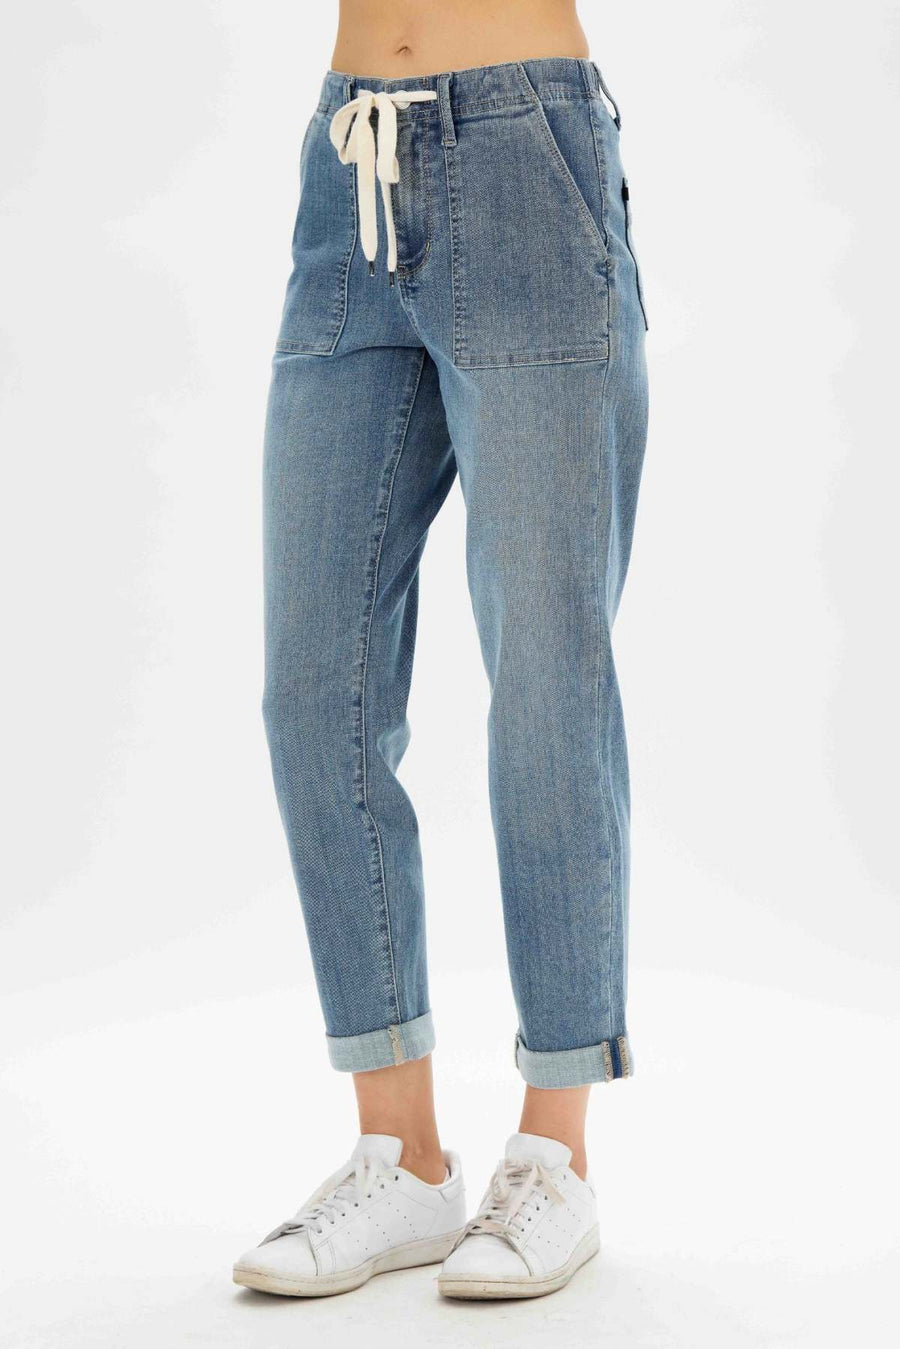 Judy Blue High Waist Pull On Jogger Jeans – Duo Studio Designs